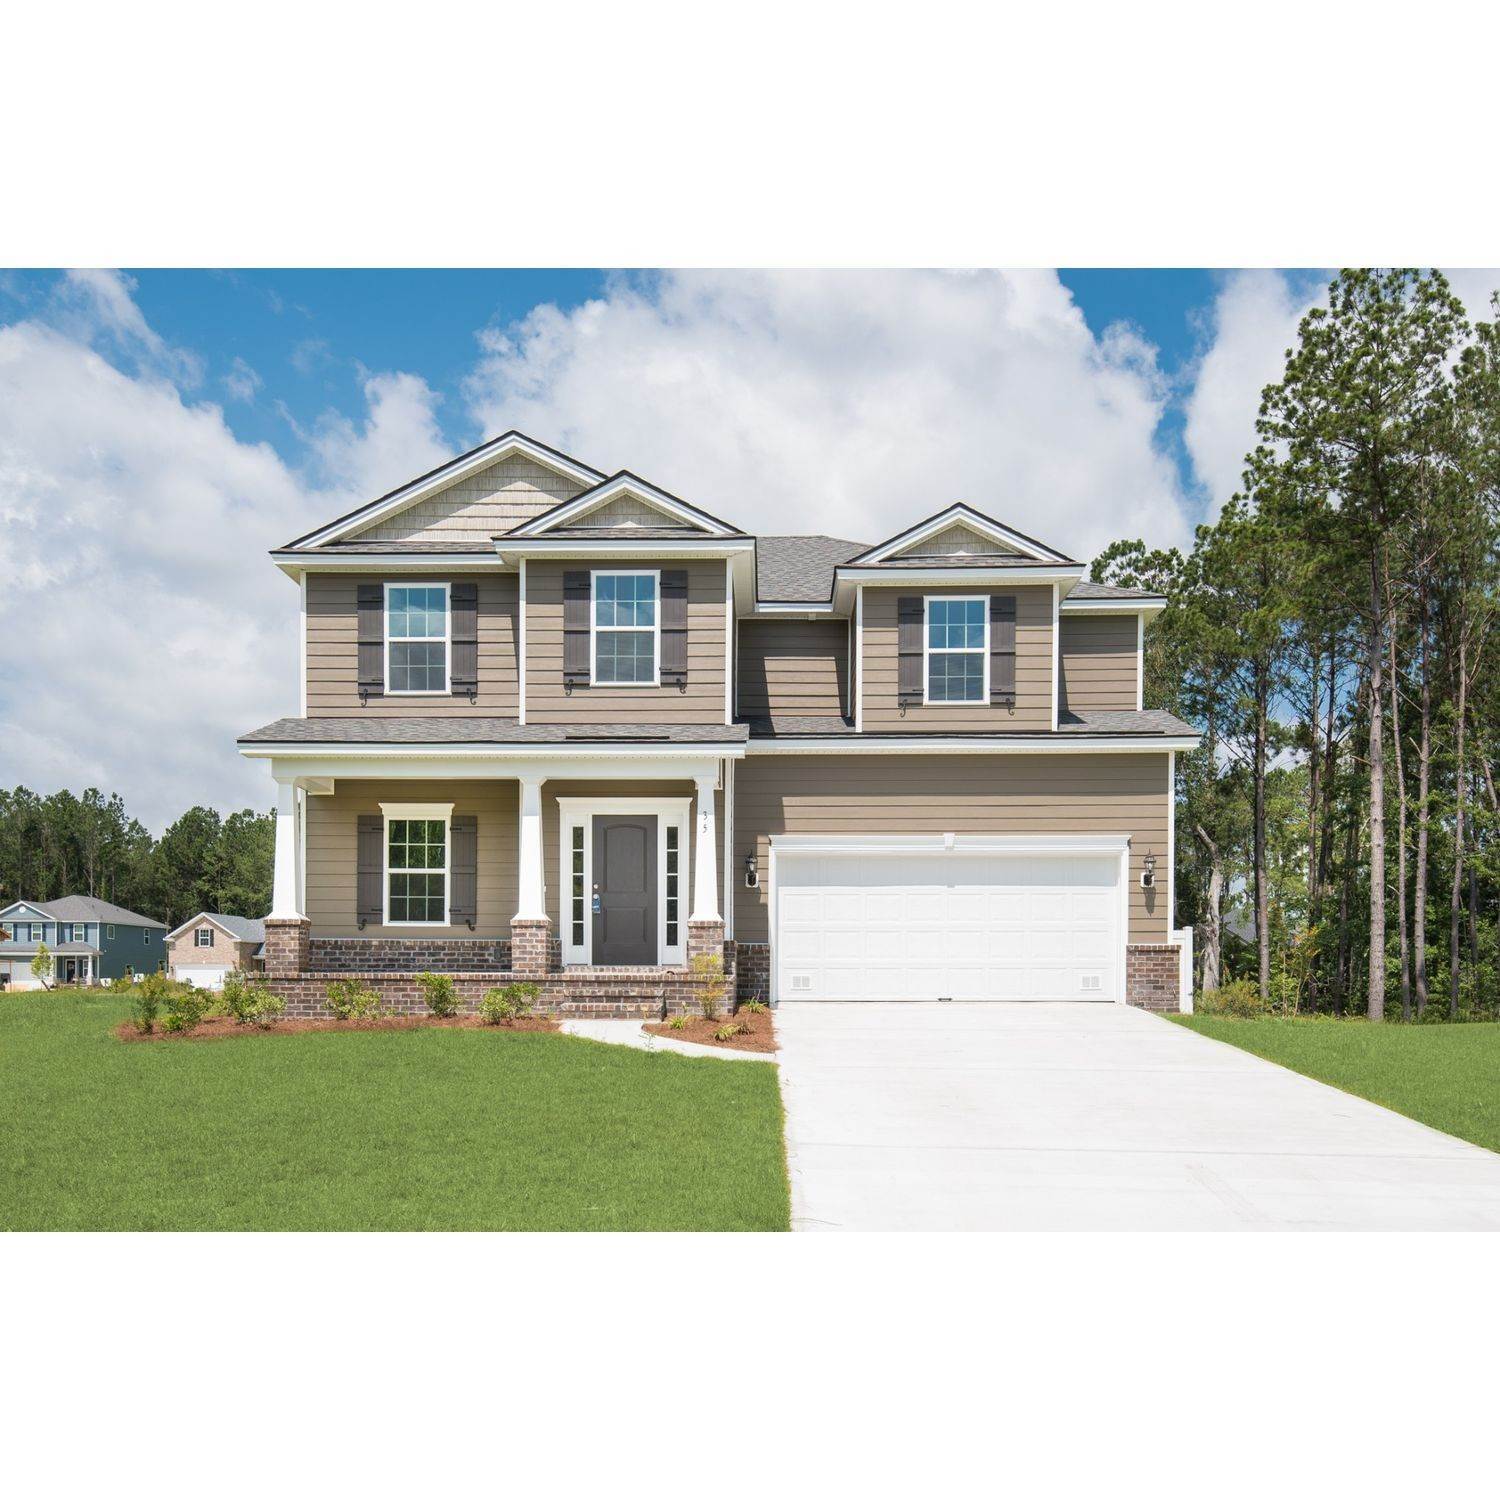 Single Family for Sale at New Haven At Belmont Glen Hodgeville Road, Guyton, GA 31312